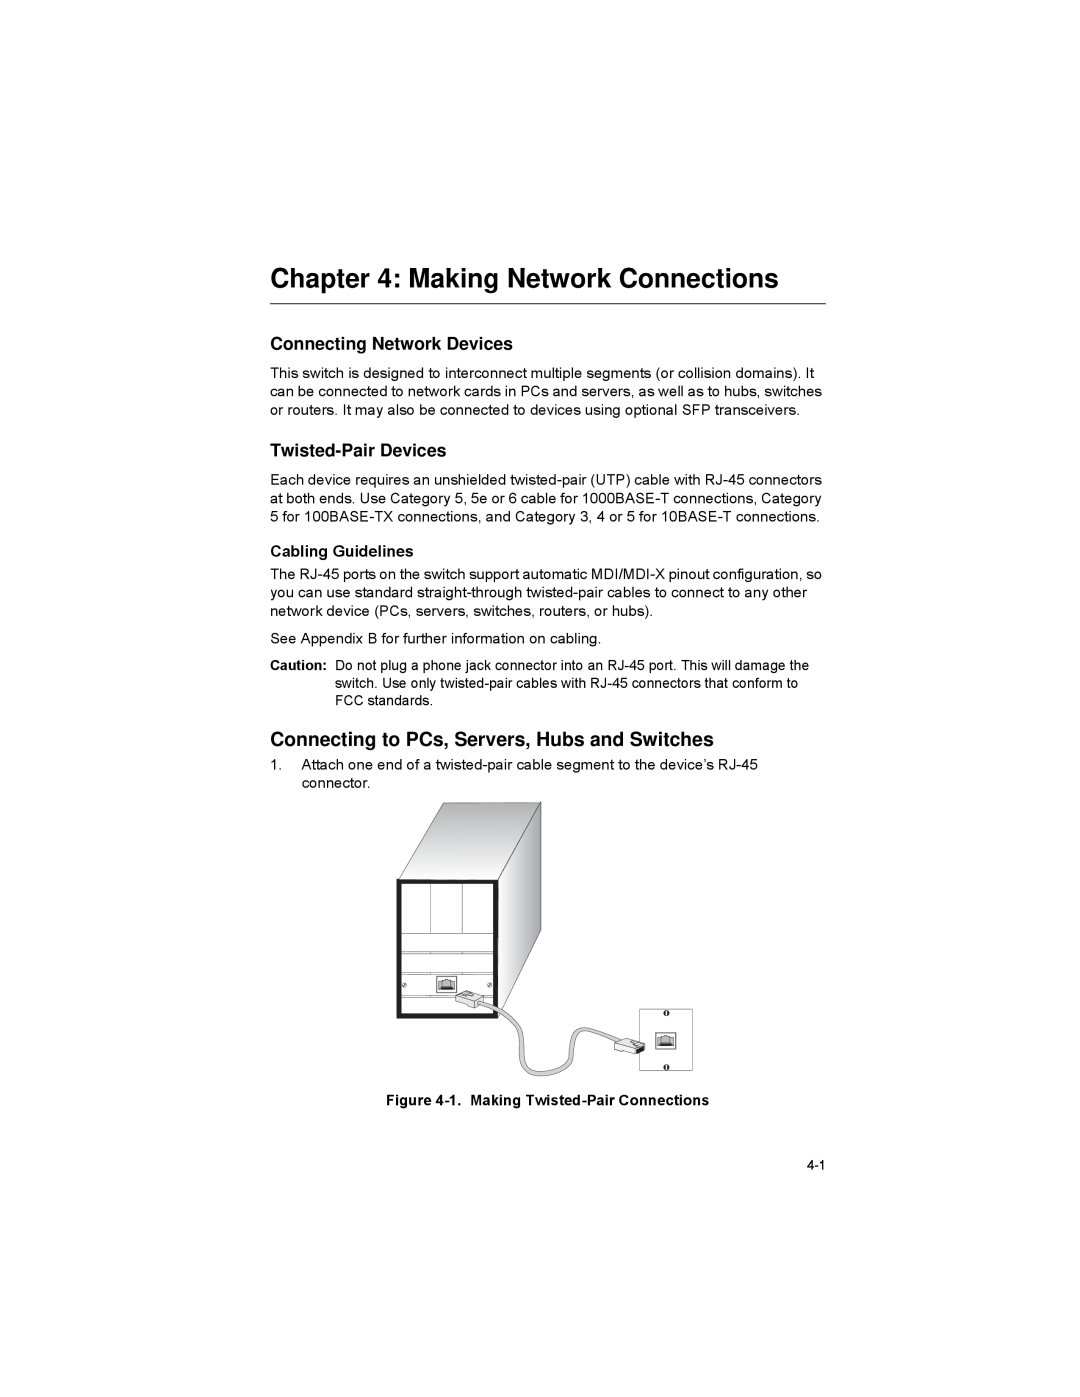 Alcatel-Lucent 6300-24 Making Network Connections, Connecting to PCs, Servers, Hubs and Switches, Twisted-Pair Devices 